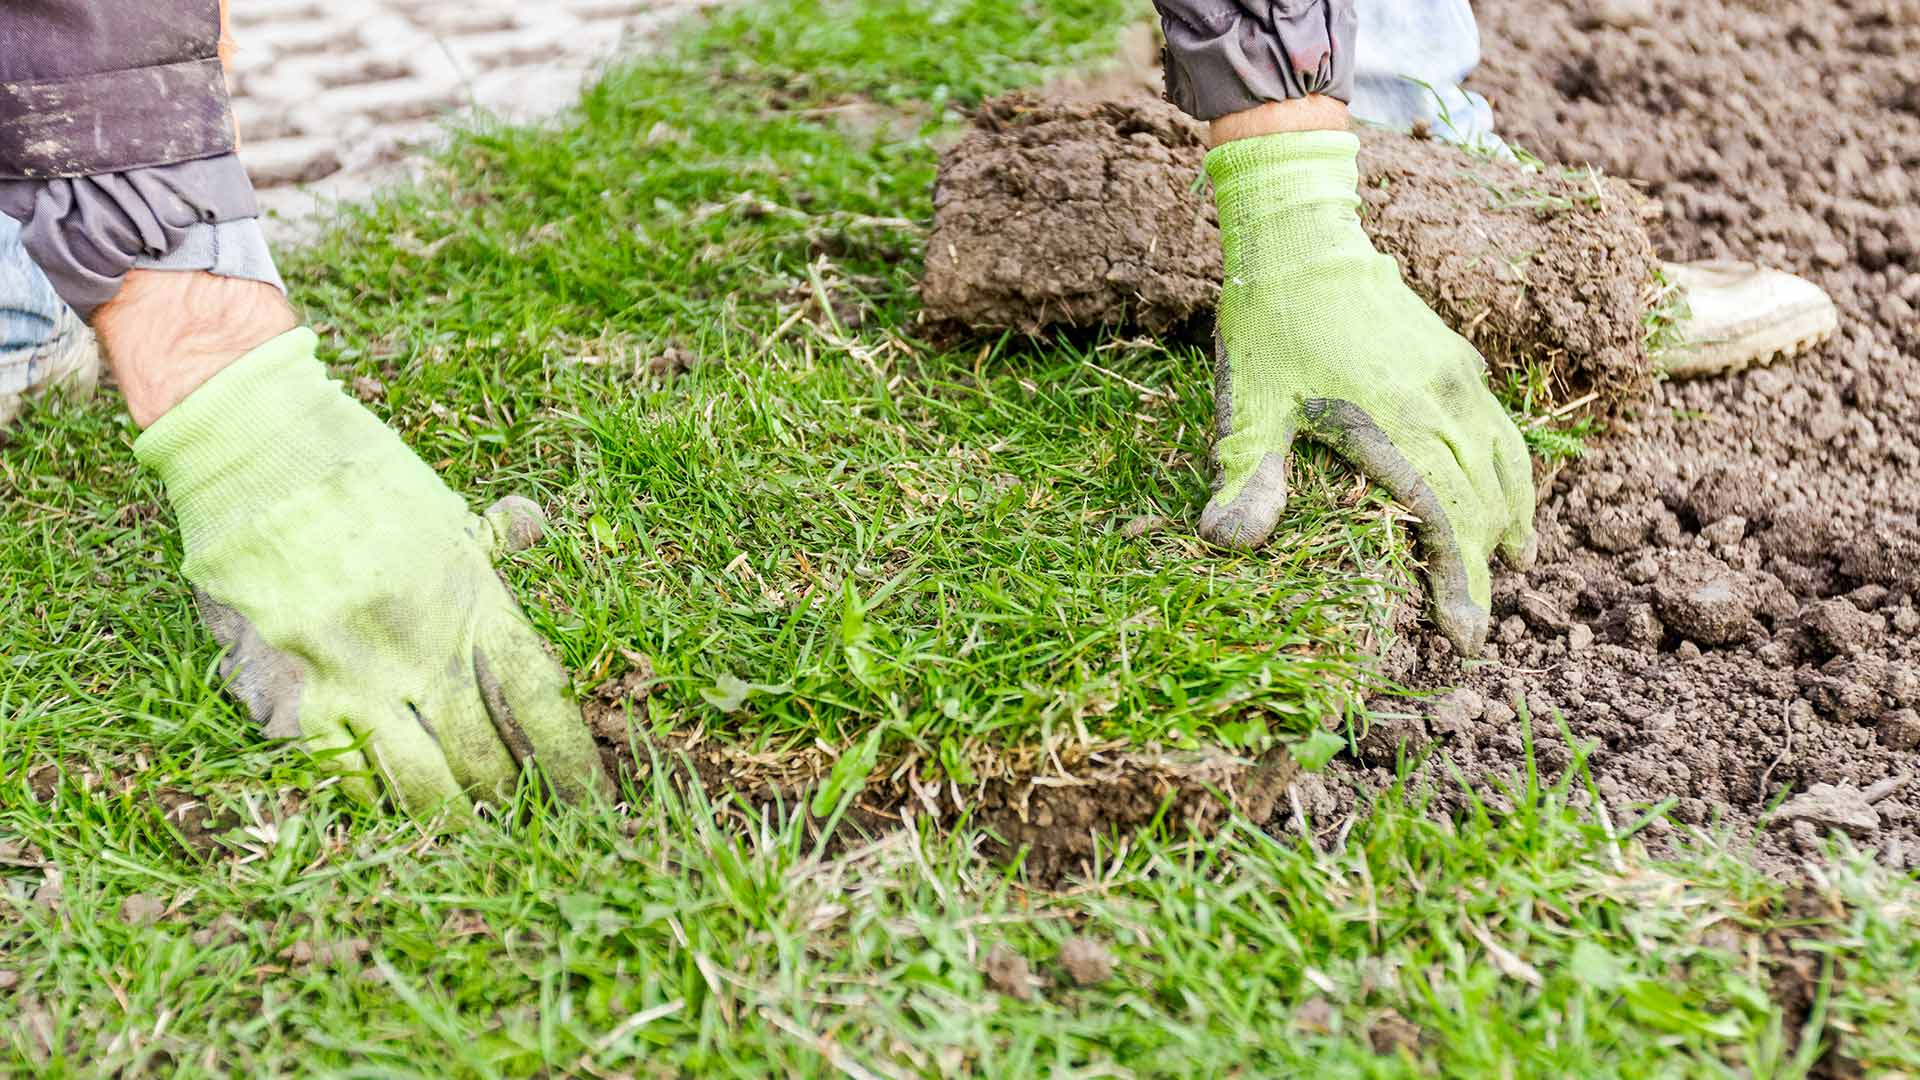 Should You Choose Sod or Seed for Your New Lawn?